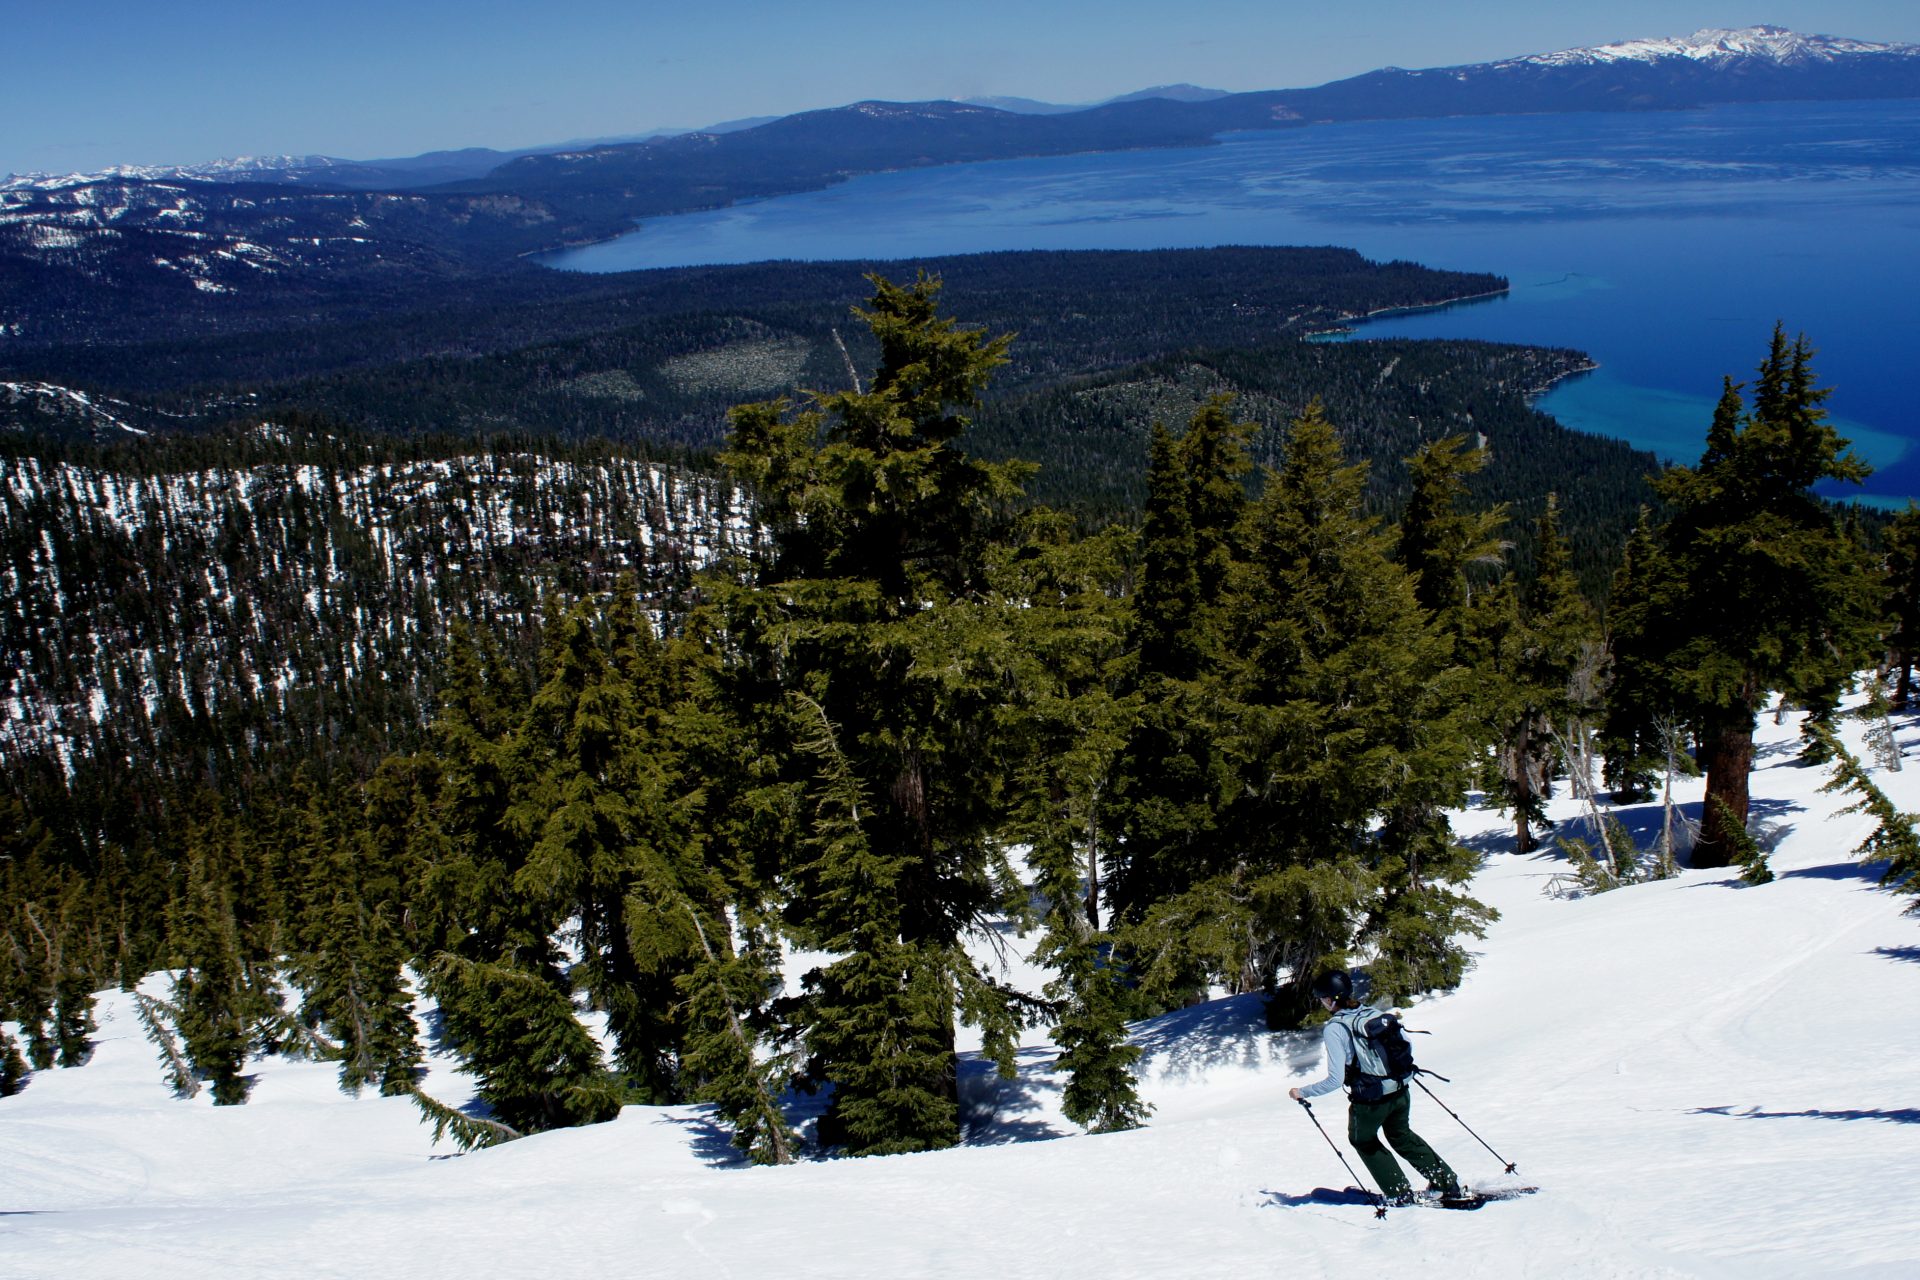 skier in open glade with views of lake Tahoe in the background